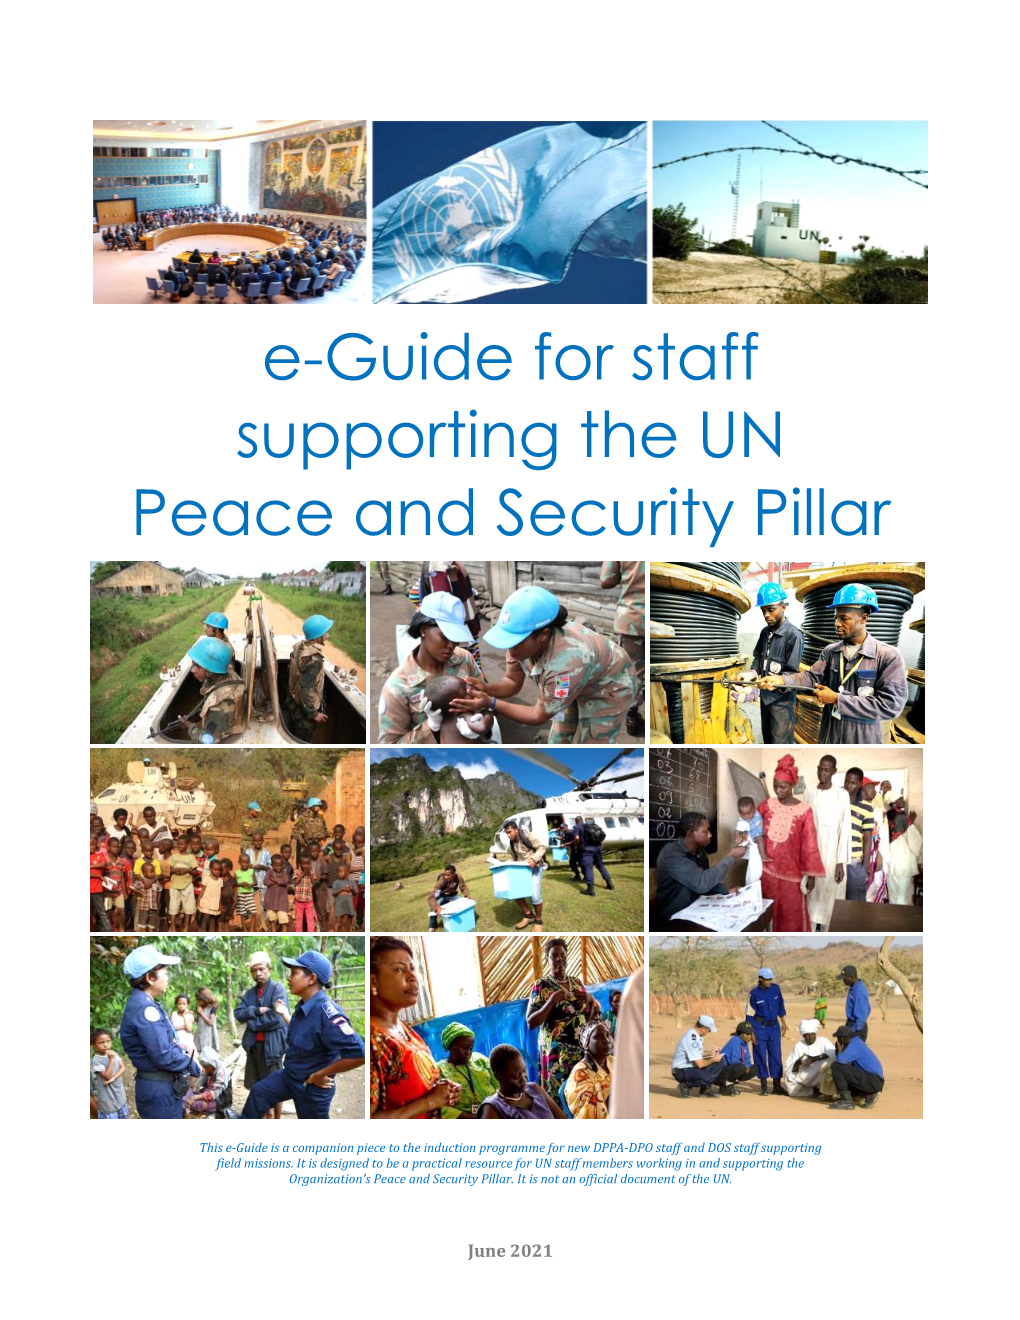 E-Guide for Staff Supporting the UN Peace and Security Pillar